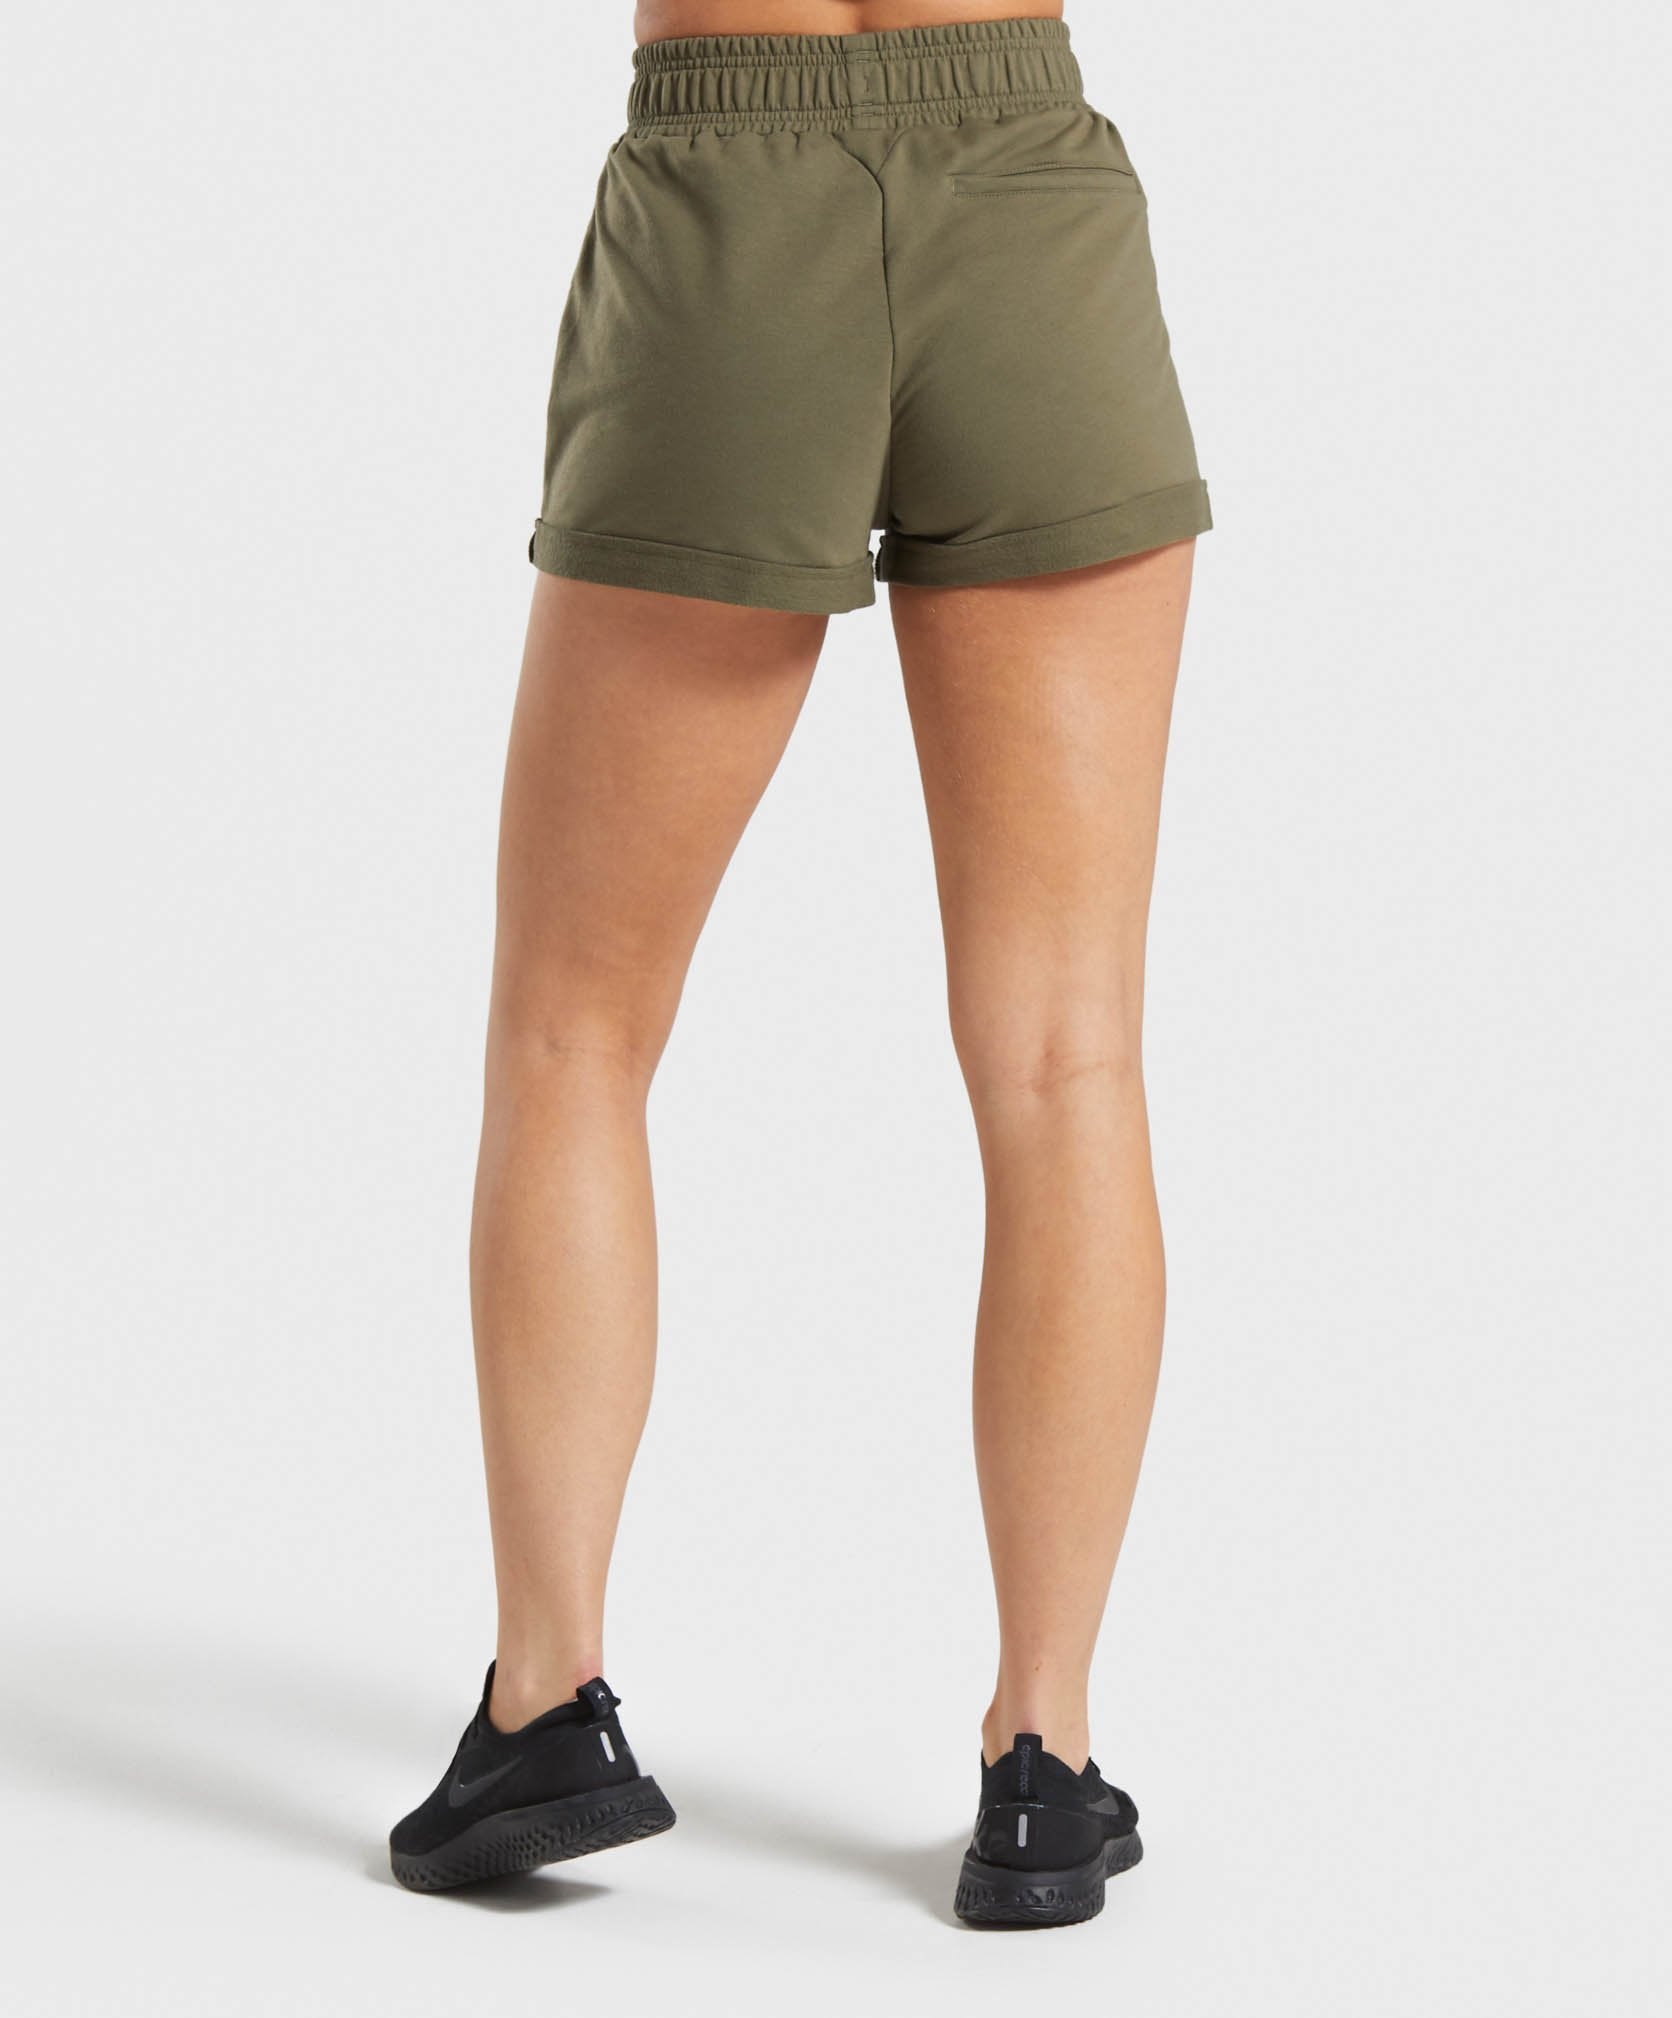 Ark High Waisted Shorts in Khaki - view 2